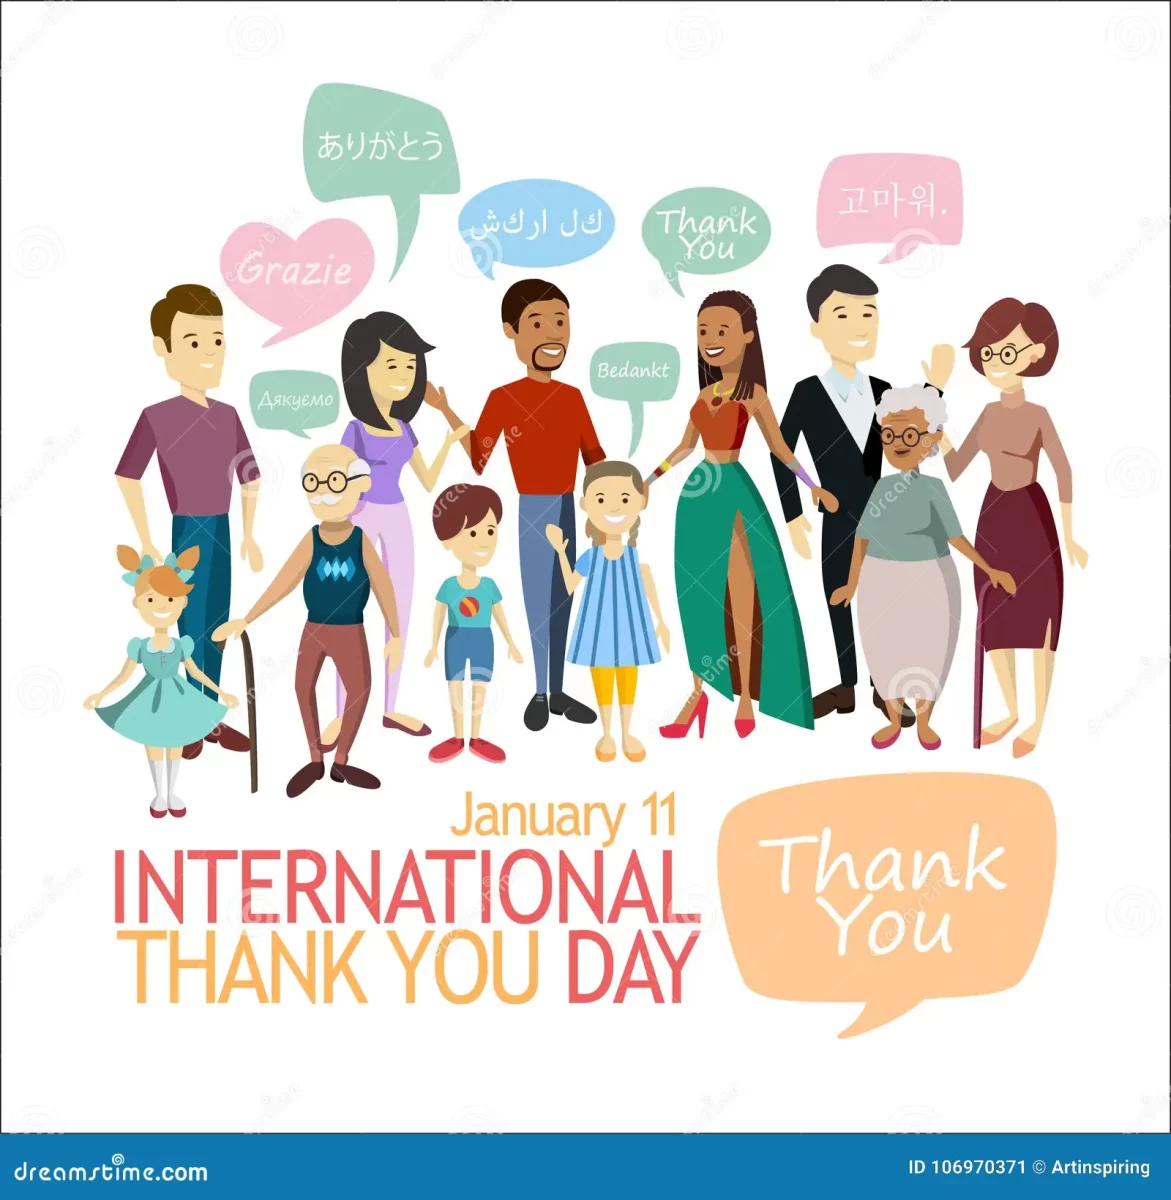 Students+and+Staff+of+HHS+Say+Thank+You-+National+Thank+You+Day